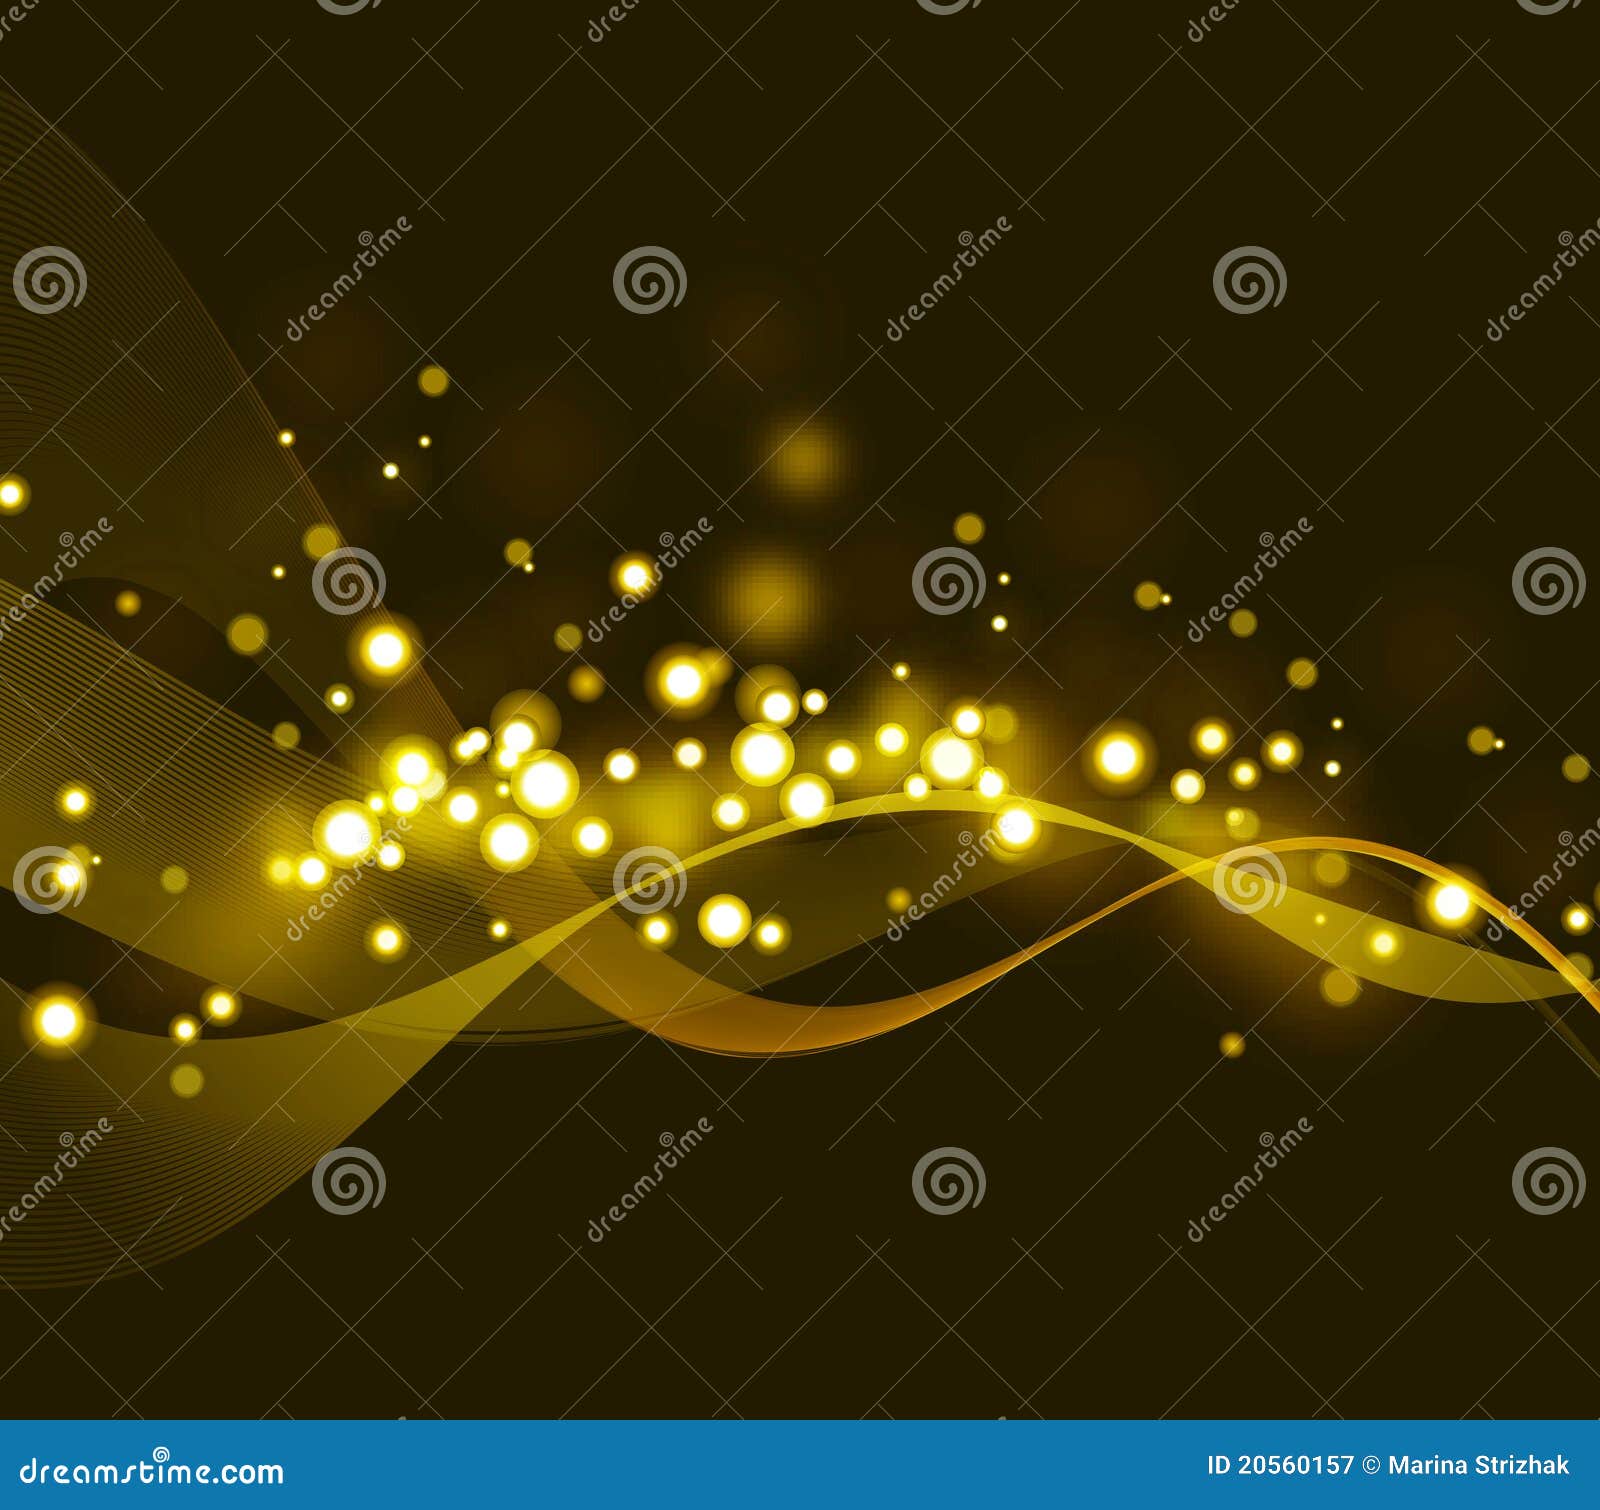 Gold abstract background stock illustration. Illustration of blank ...